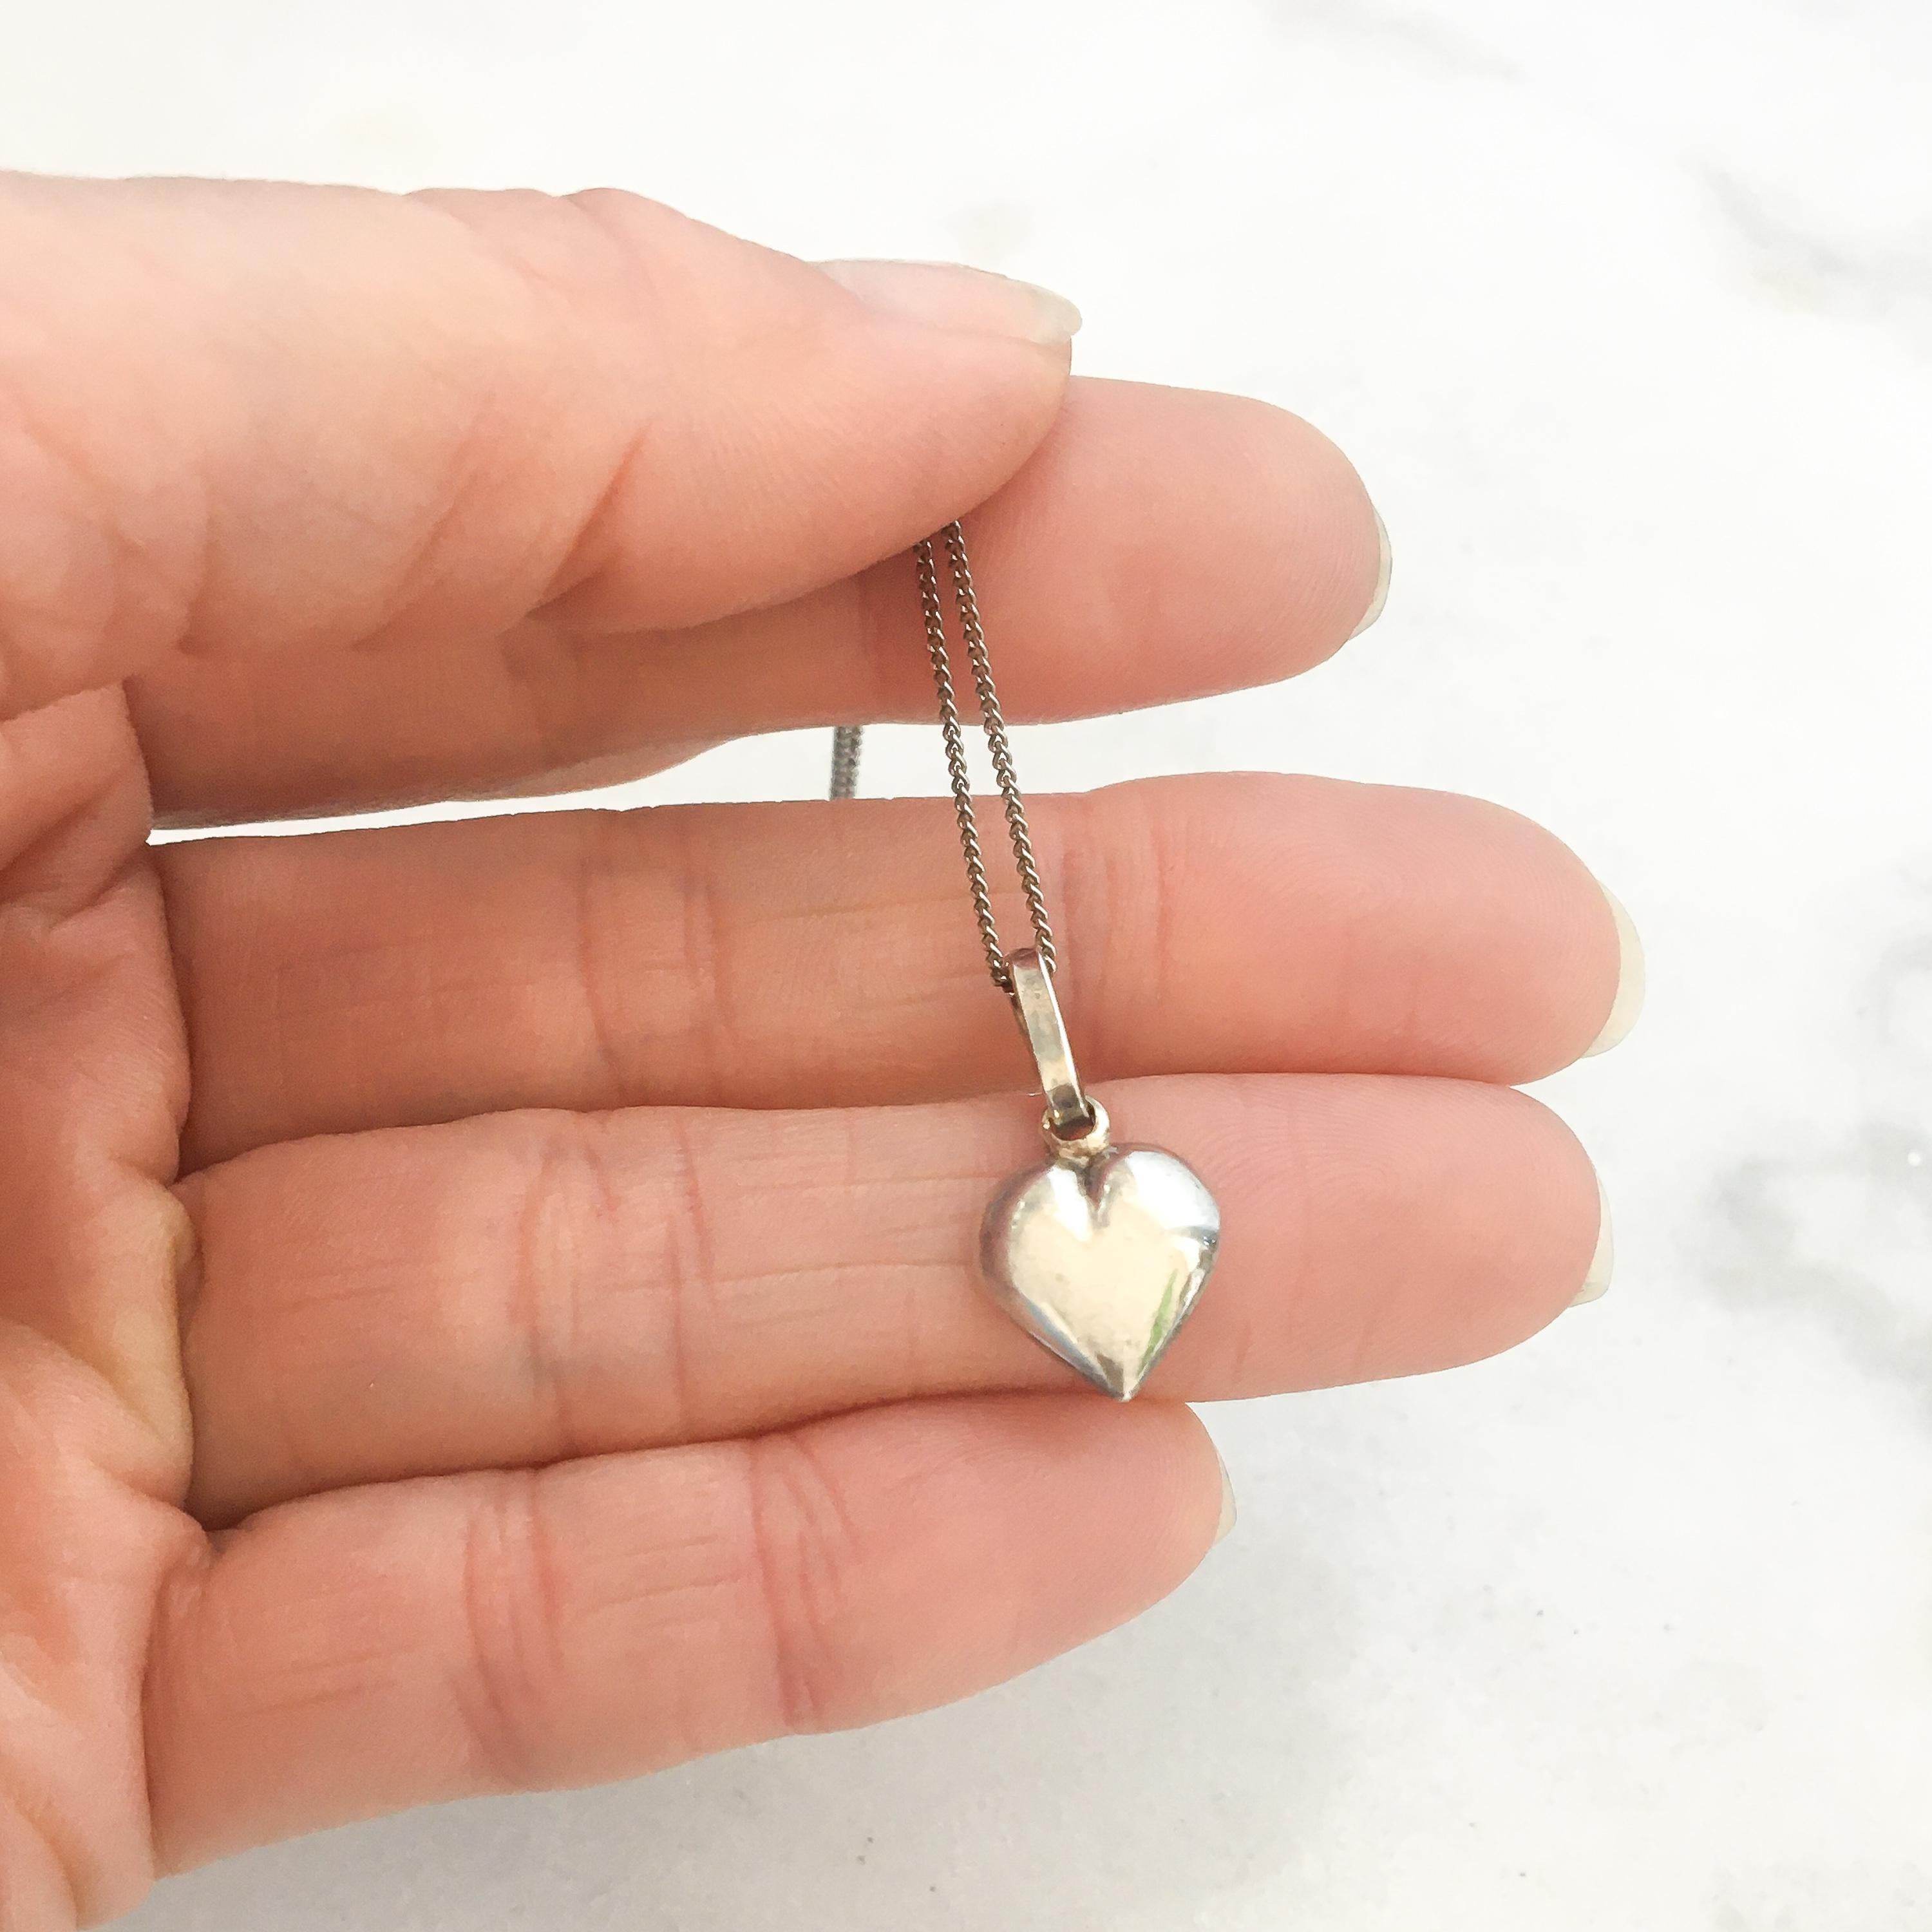 Women's or Men's Vintage Silver Heart and Typewriter Charm Pendants